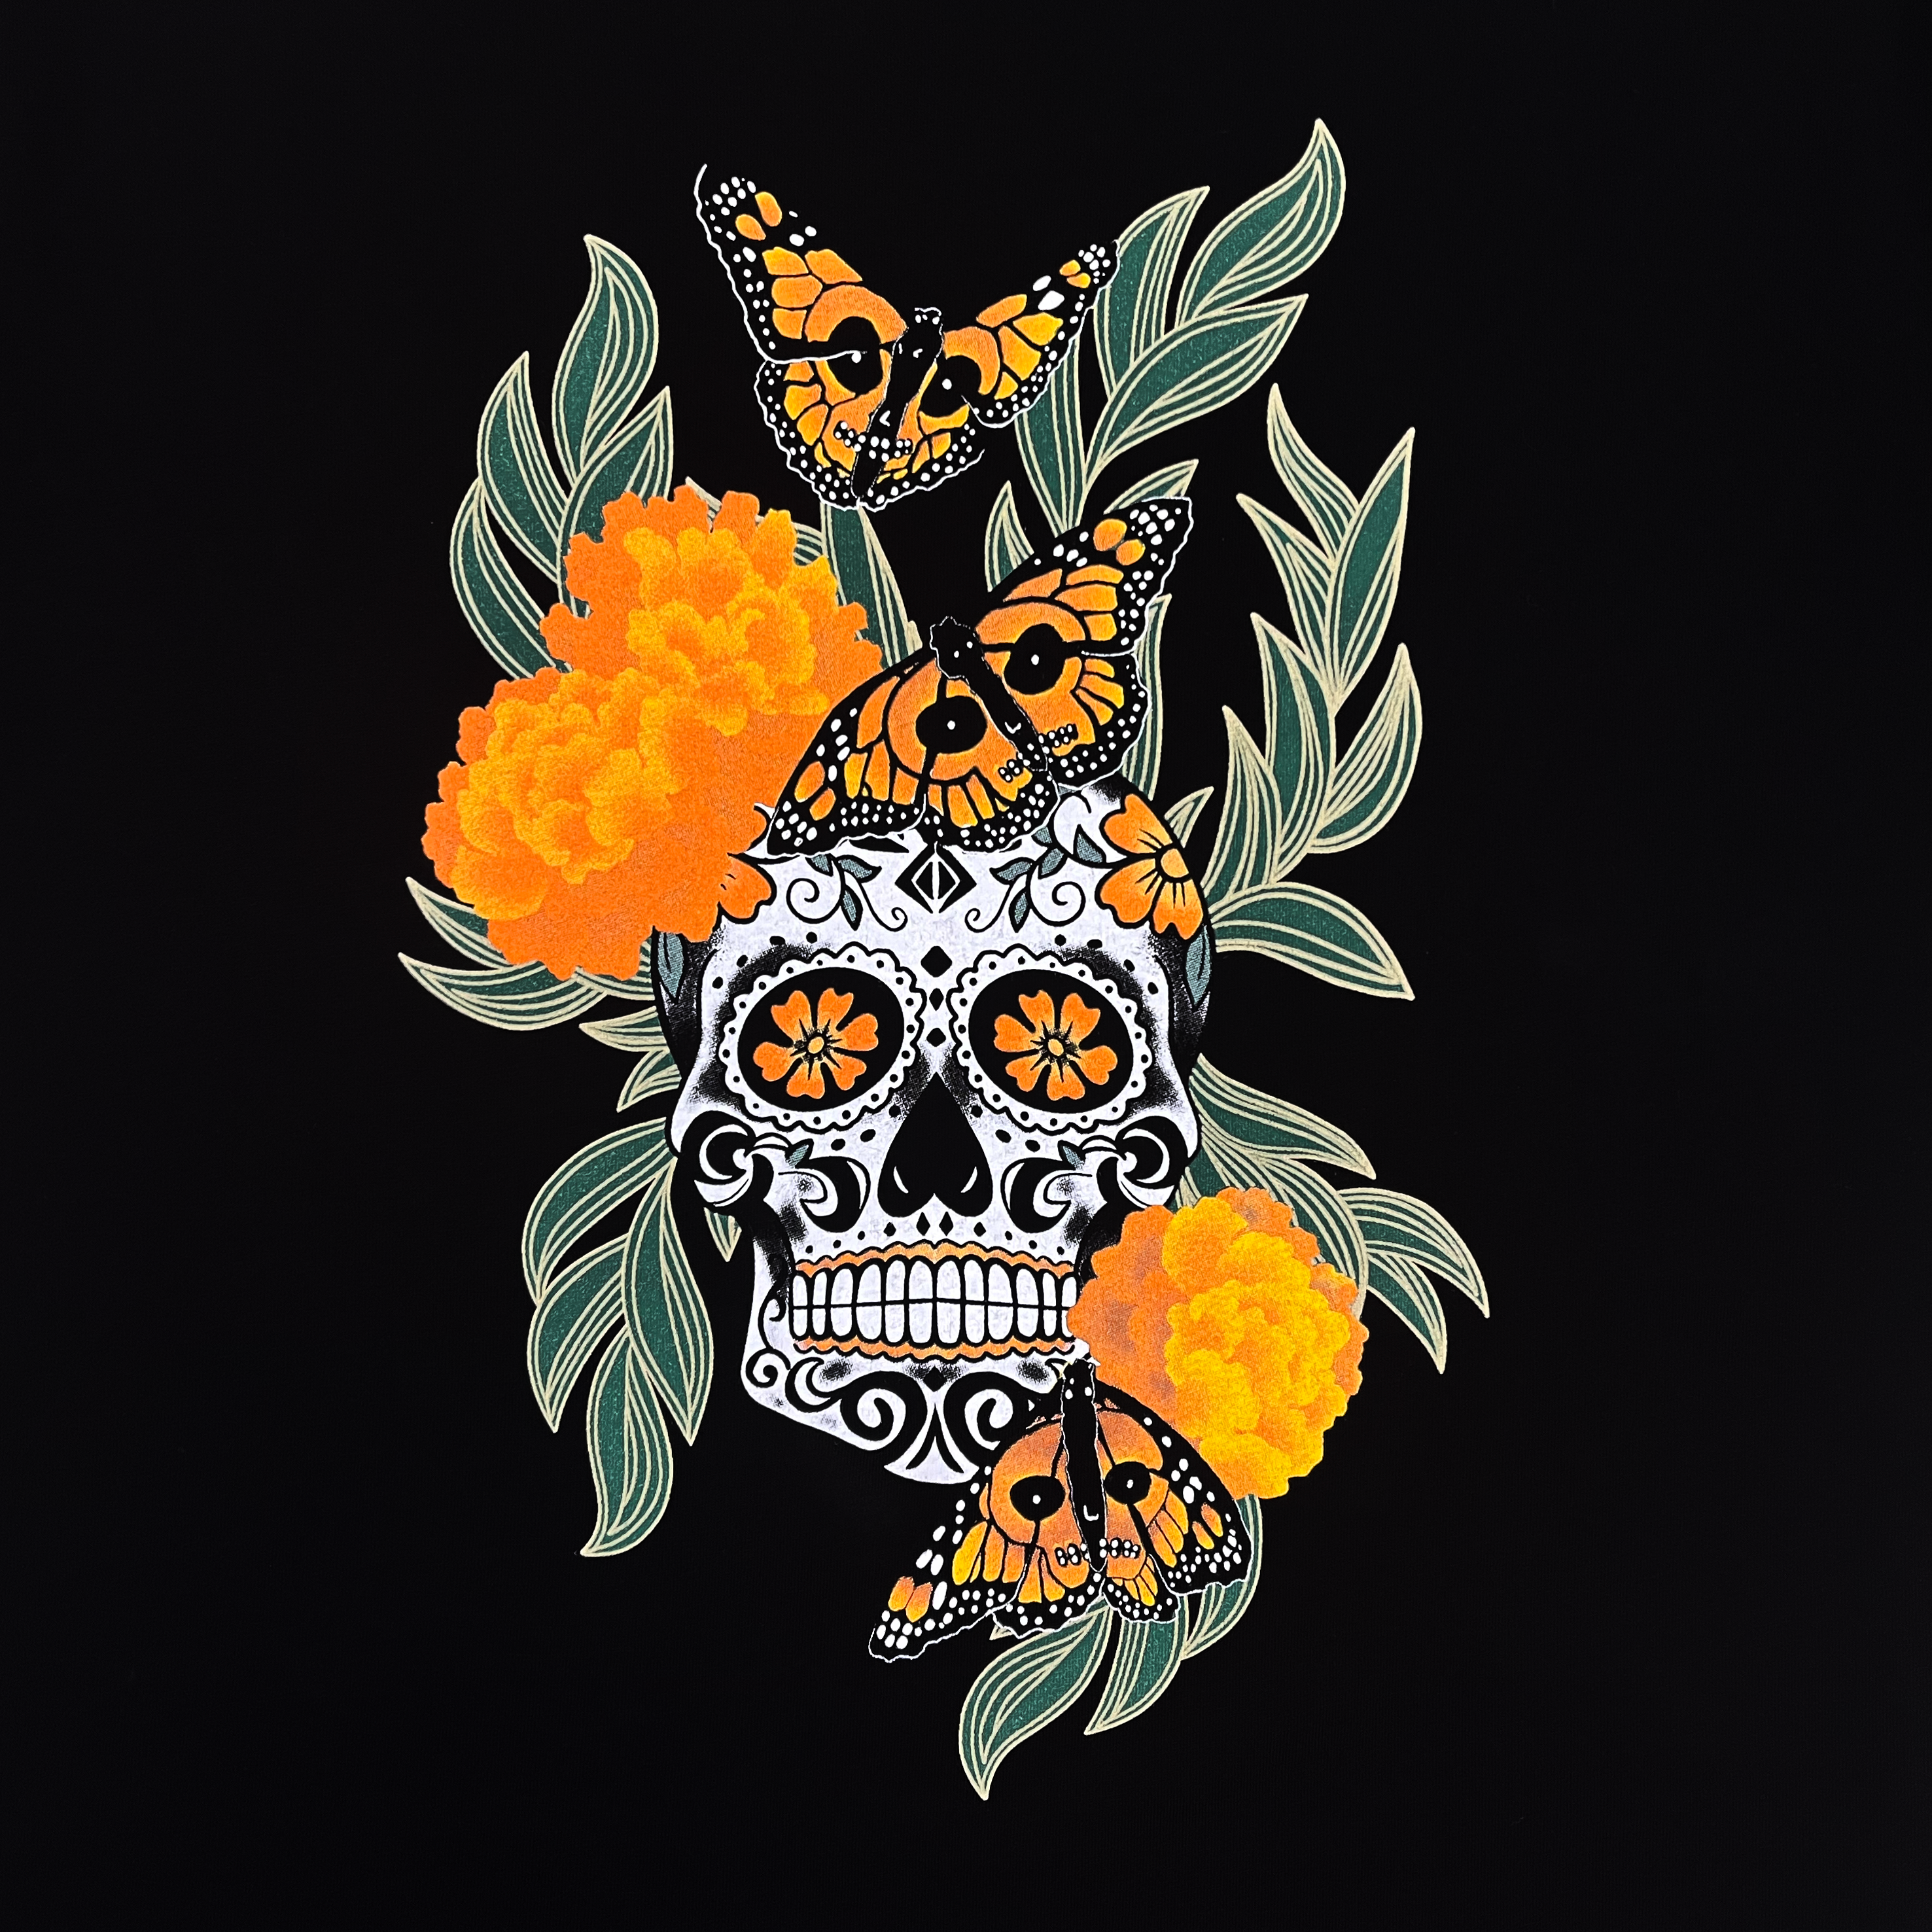 A close-up of Oakland artist Jet Martinez's graphic art depicts a sugar skull surrounded by Marigolds and Monarch butterflies on a black toddler t-shirt.